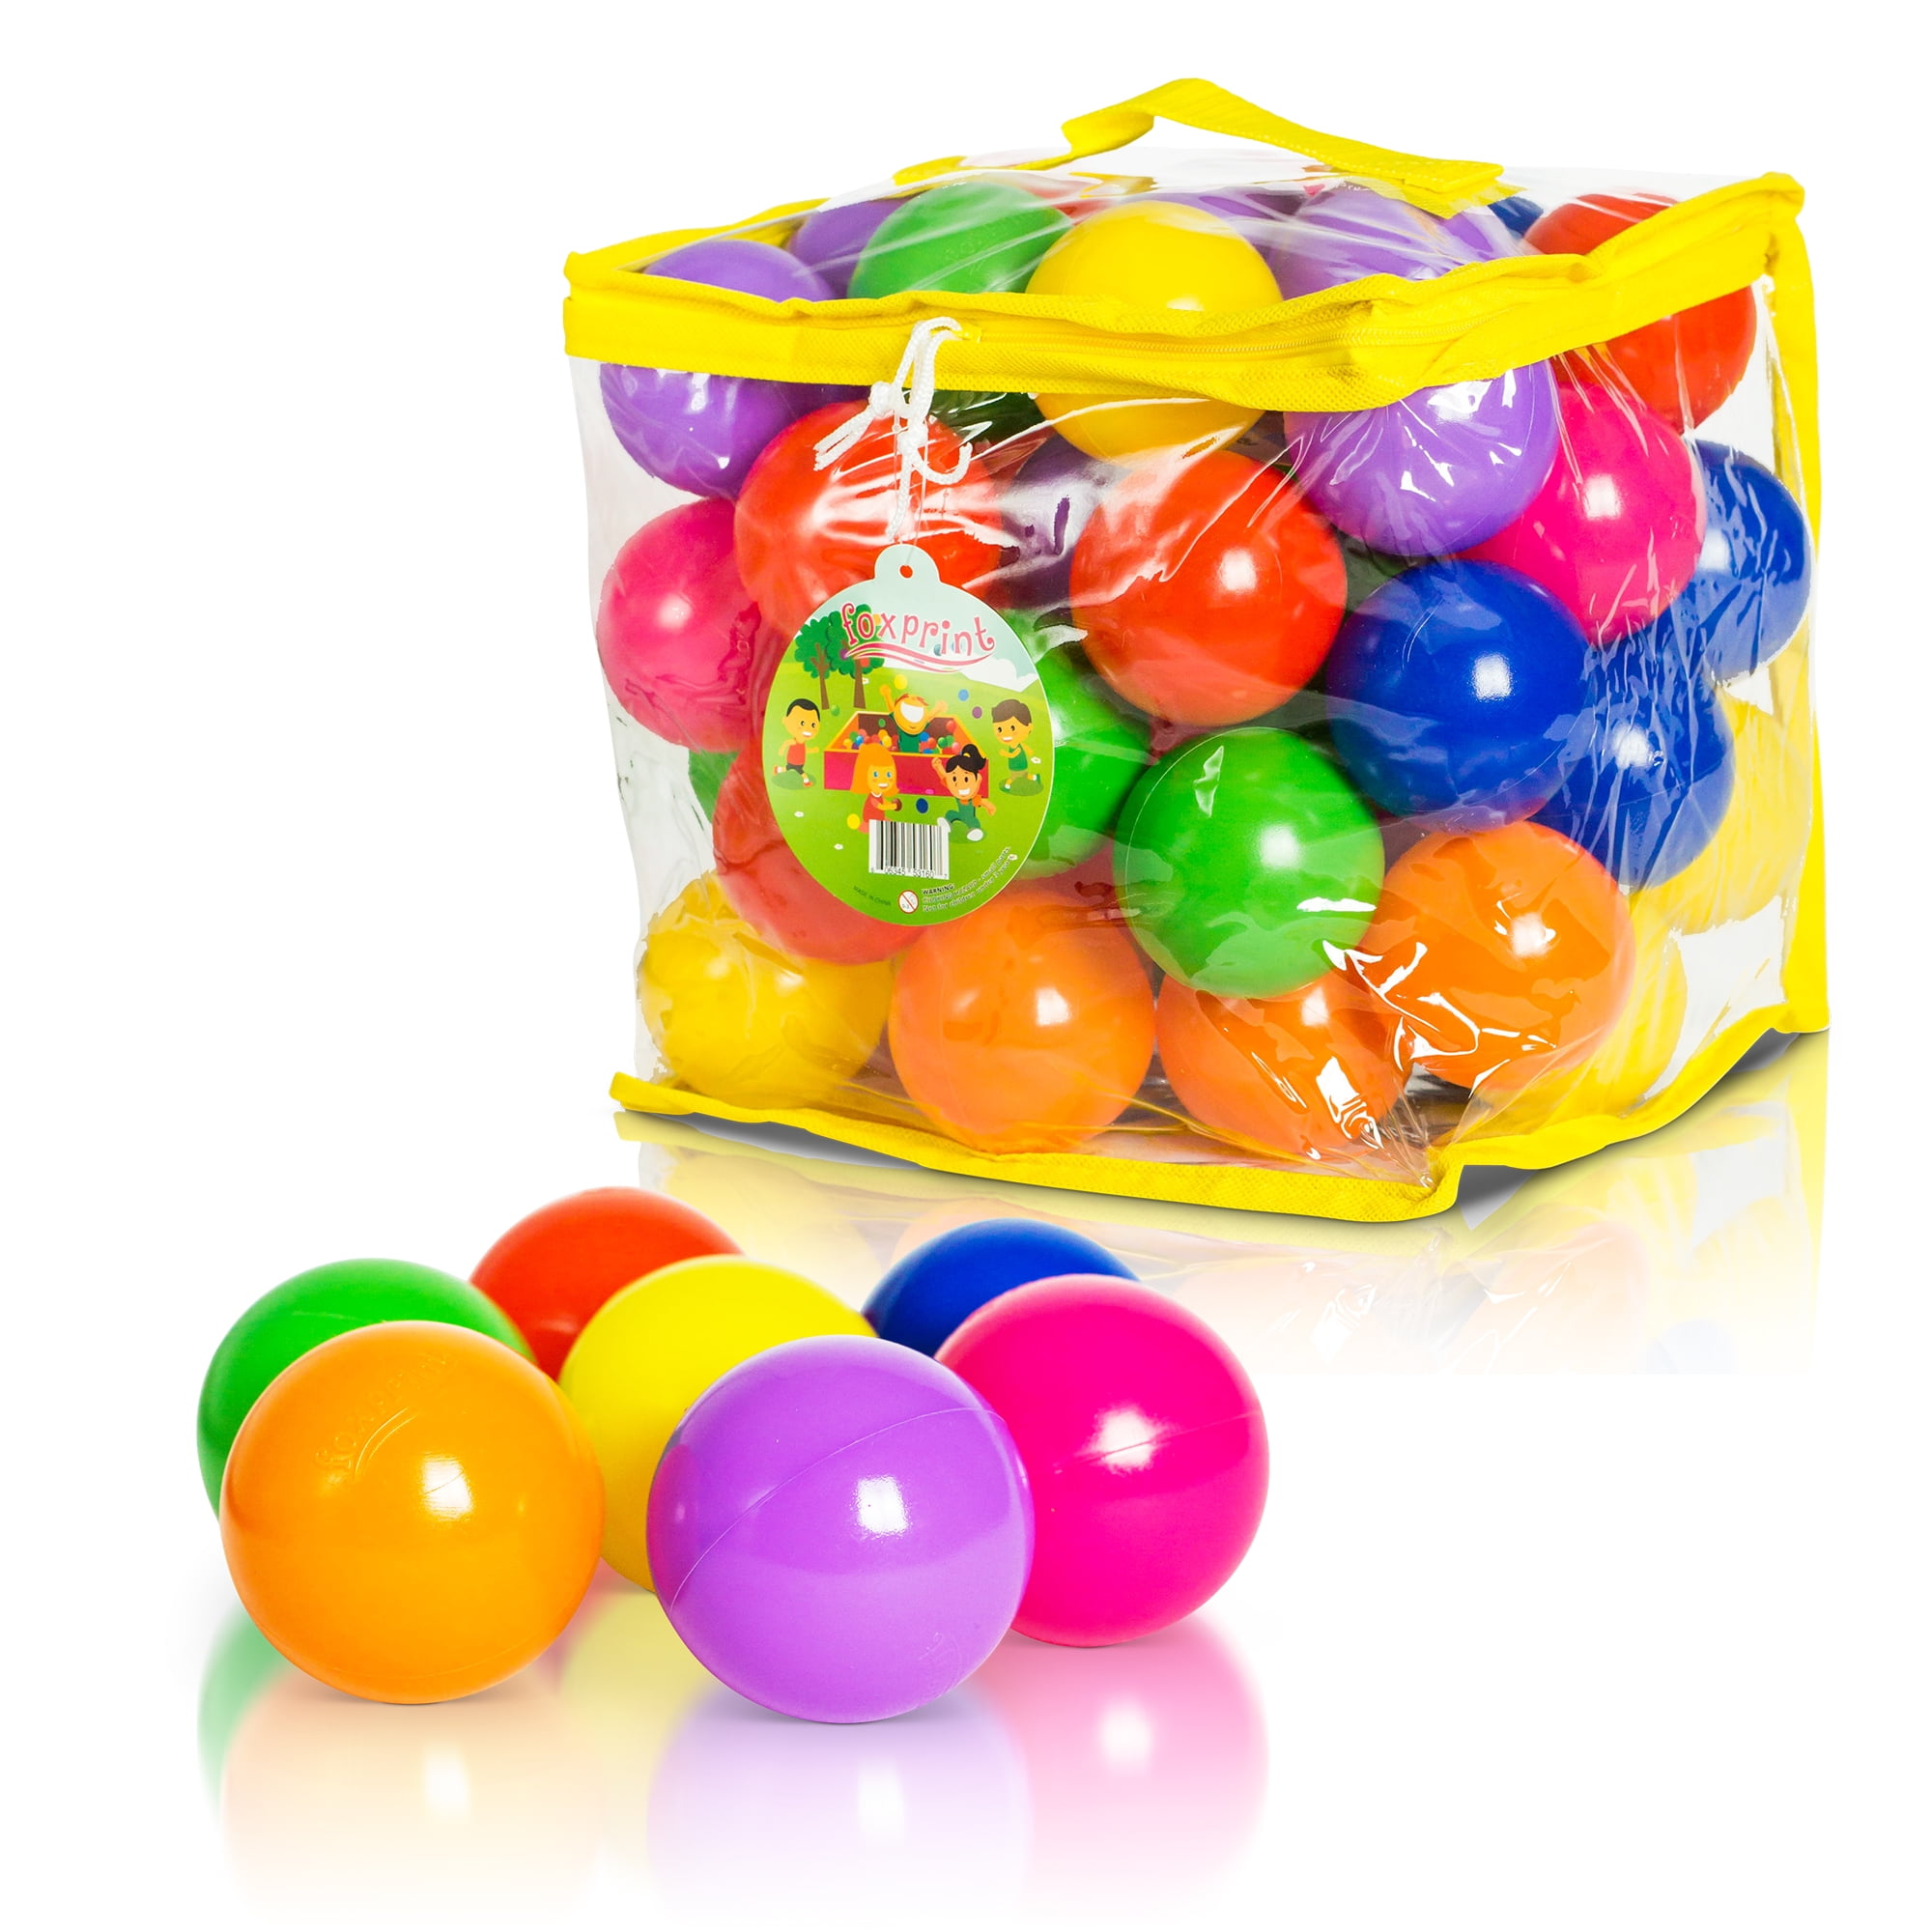 KIDS CHILDRENS PLASTIC PLAY BALLS FOR BALL PITS PEN POOL MULTICOLOURED TOY SOFT 